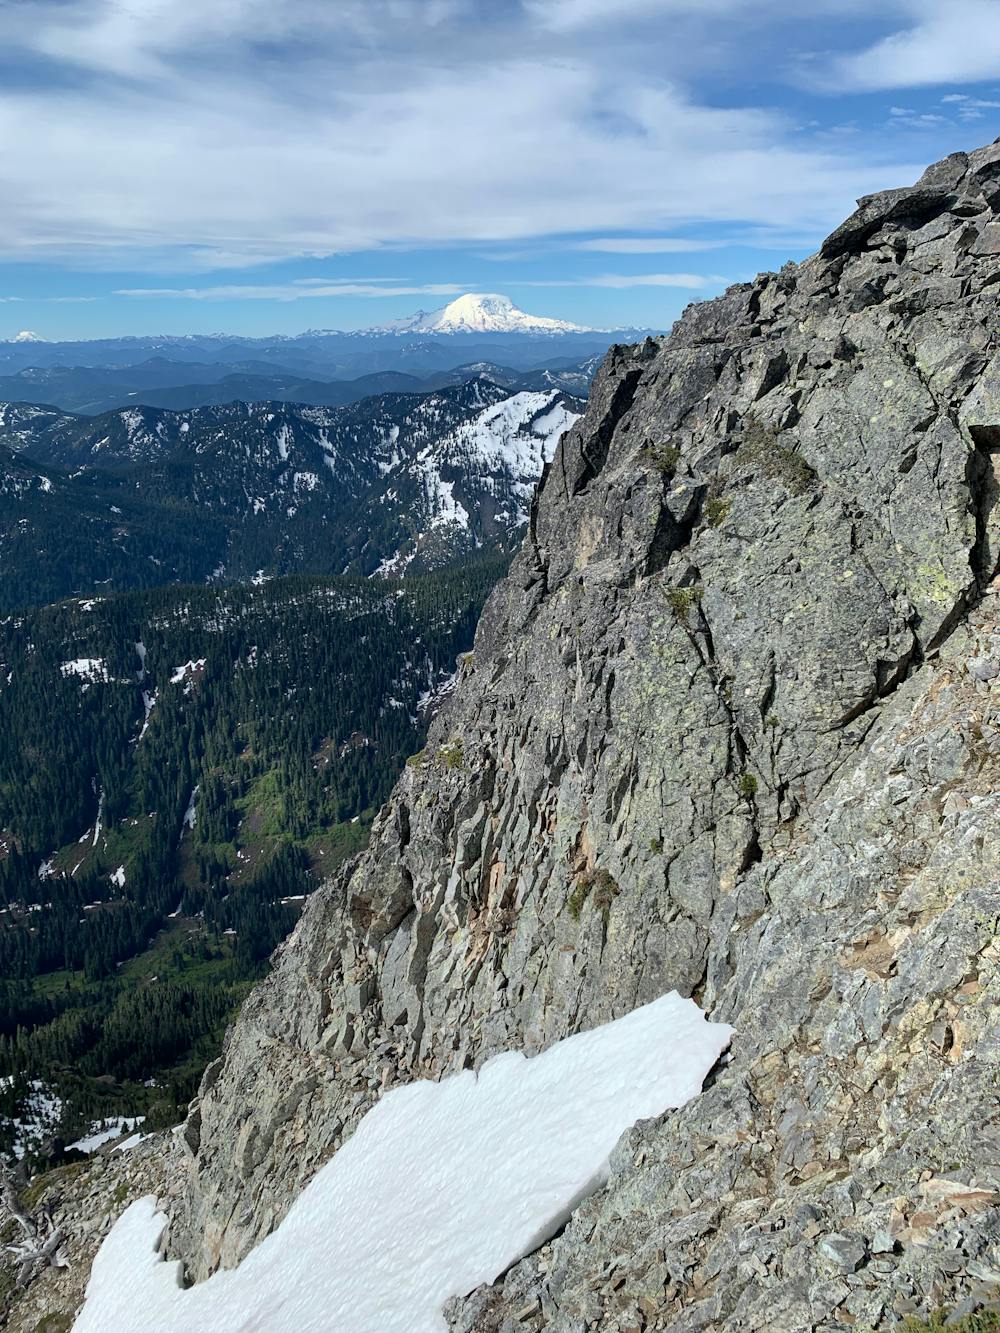 Mount Rainier and an optional scrambling route from just below the Hibox summit